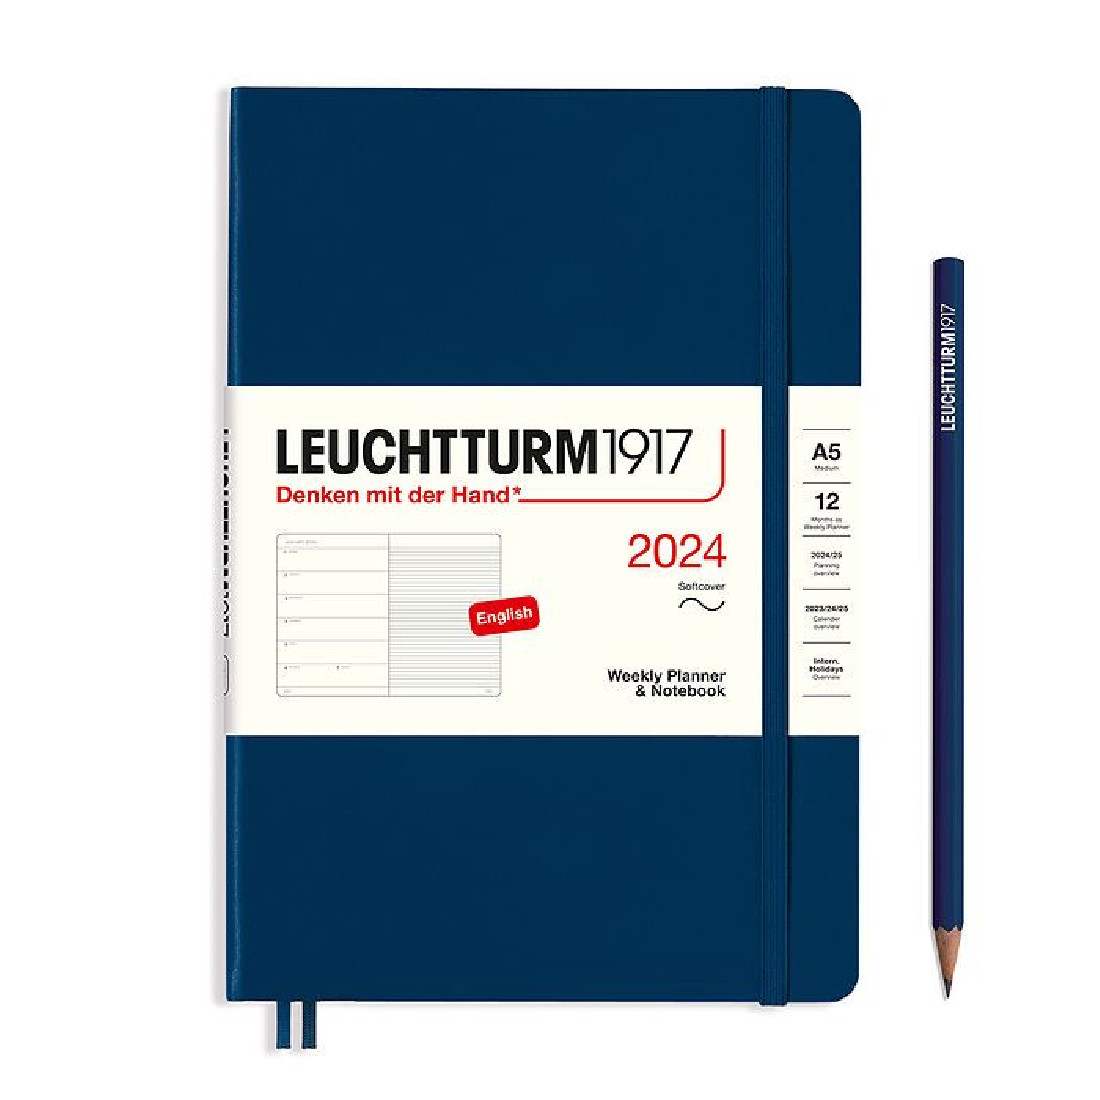 Leuchtturm 1917 Weekly Planner and Notebook 2024 Navy Medium A5 Soft Cover